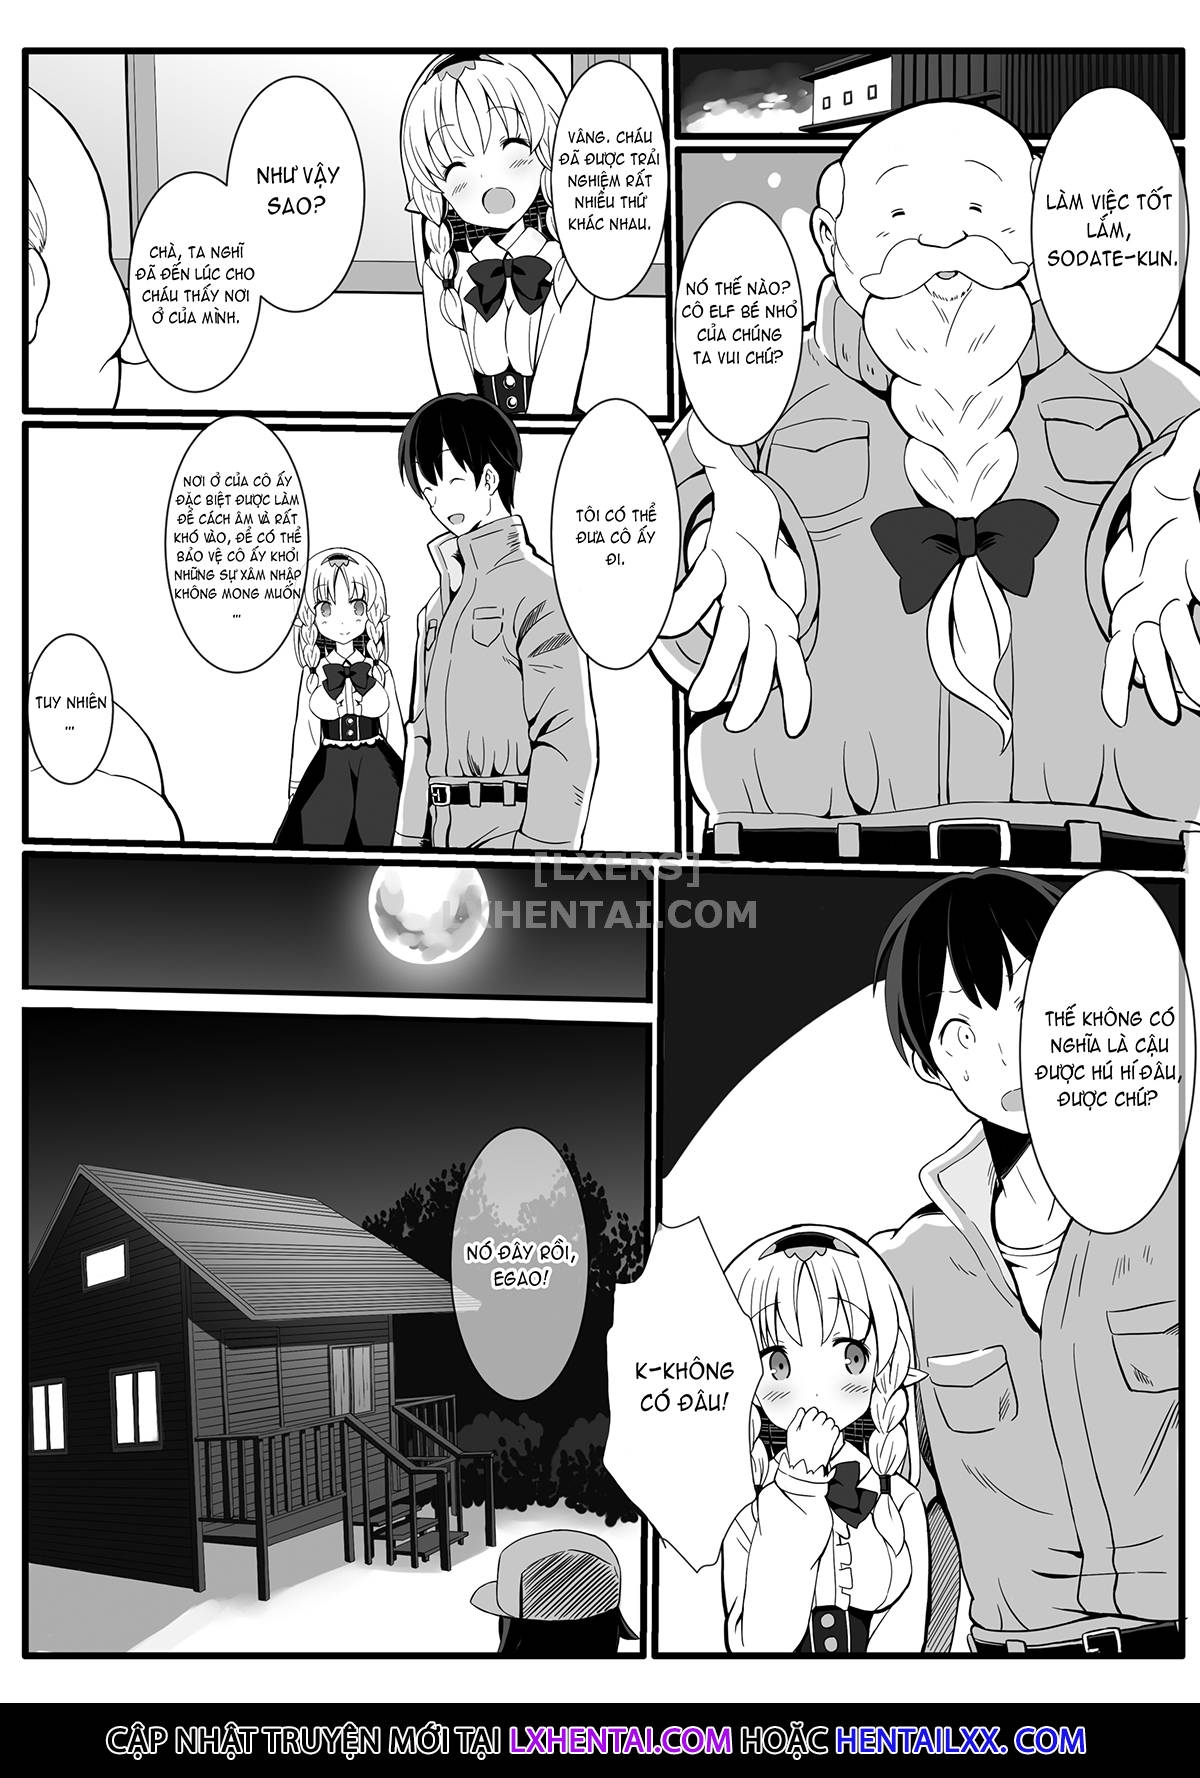 Xem ảnh Monster Girls With A Need For Seed - Chap 6 - 161583257519_0 - HentaiTruyen.net